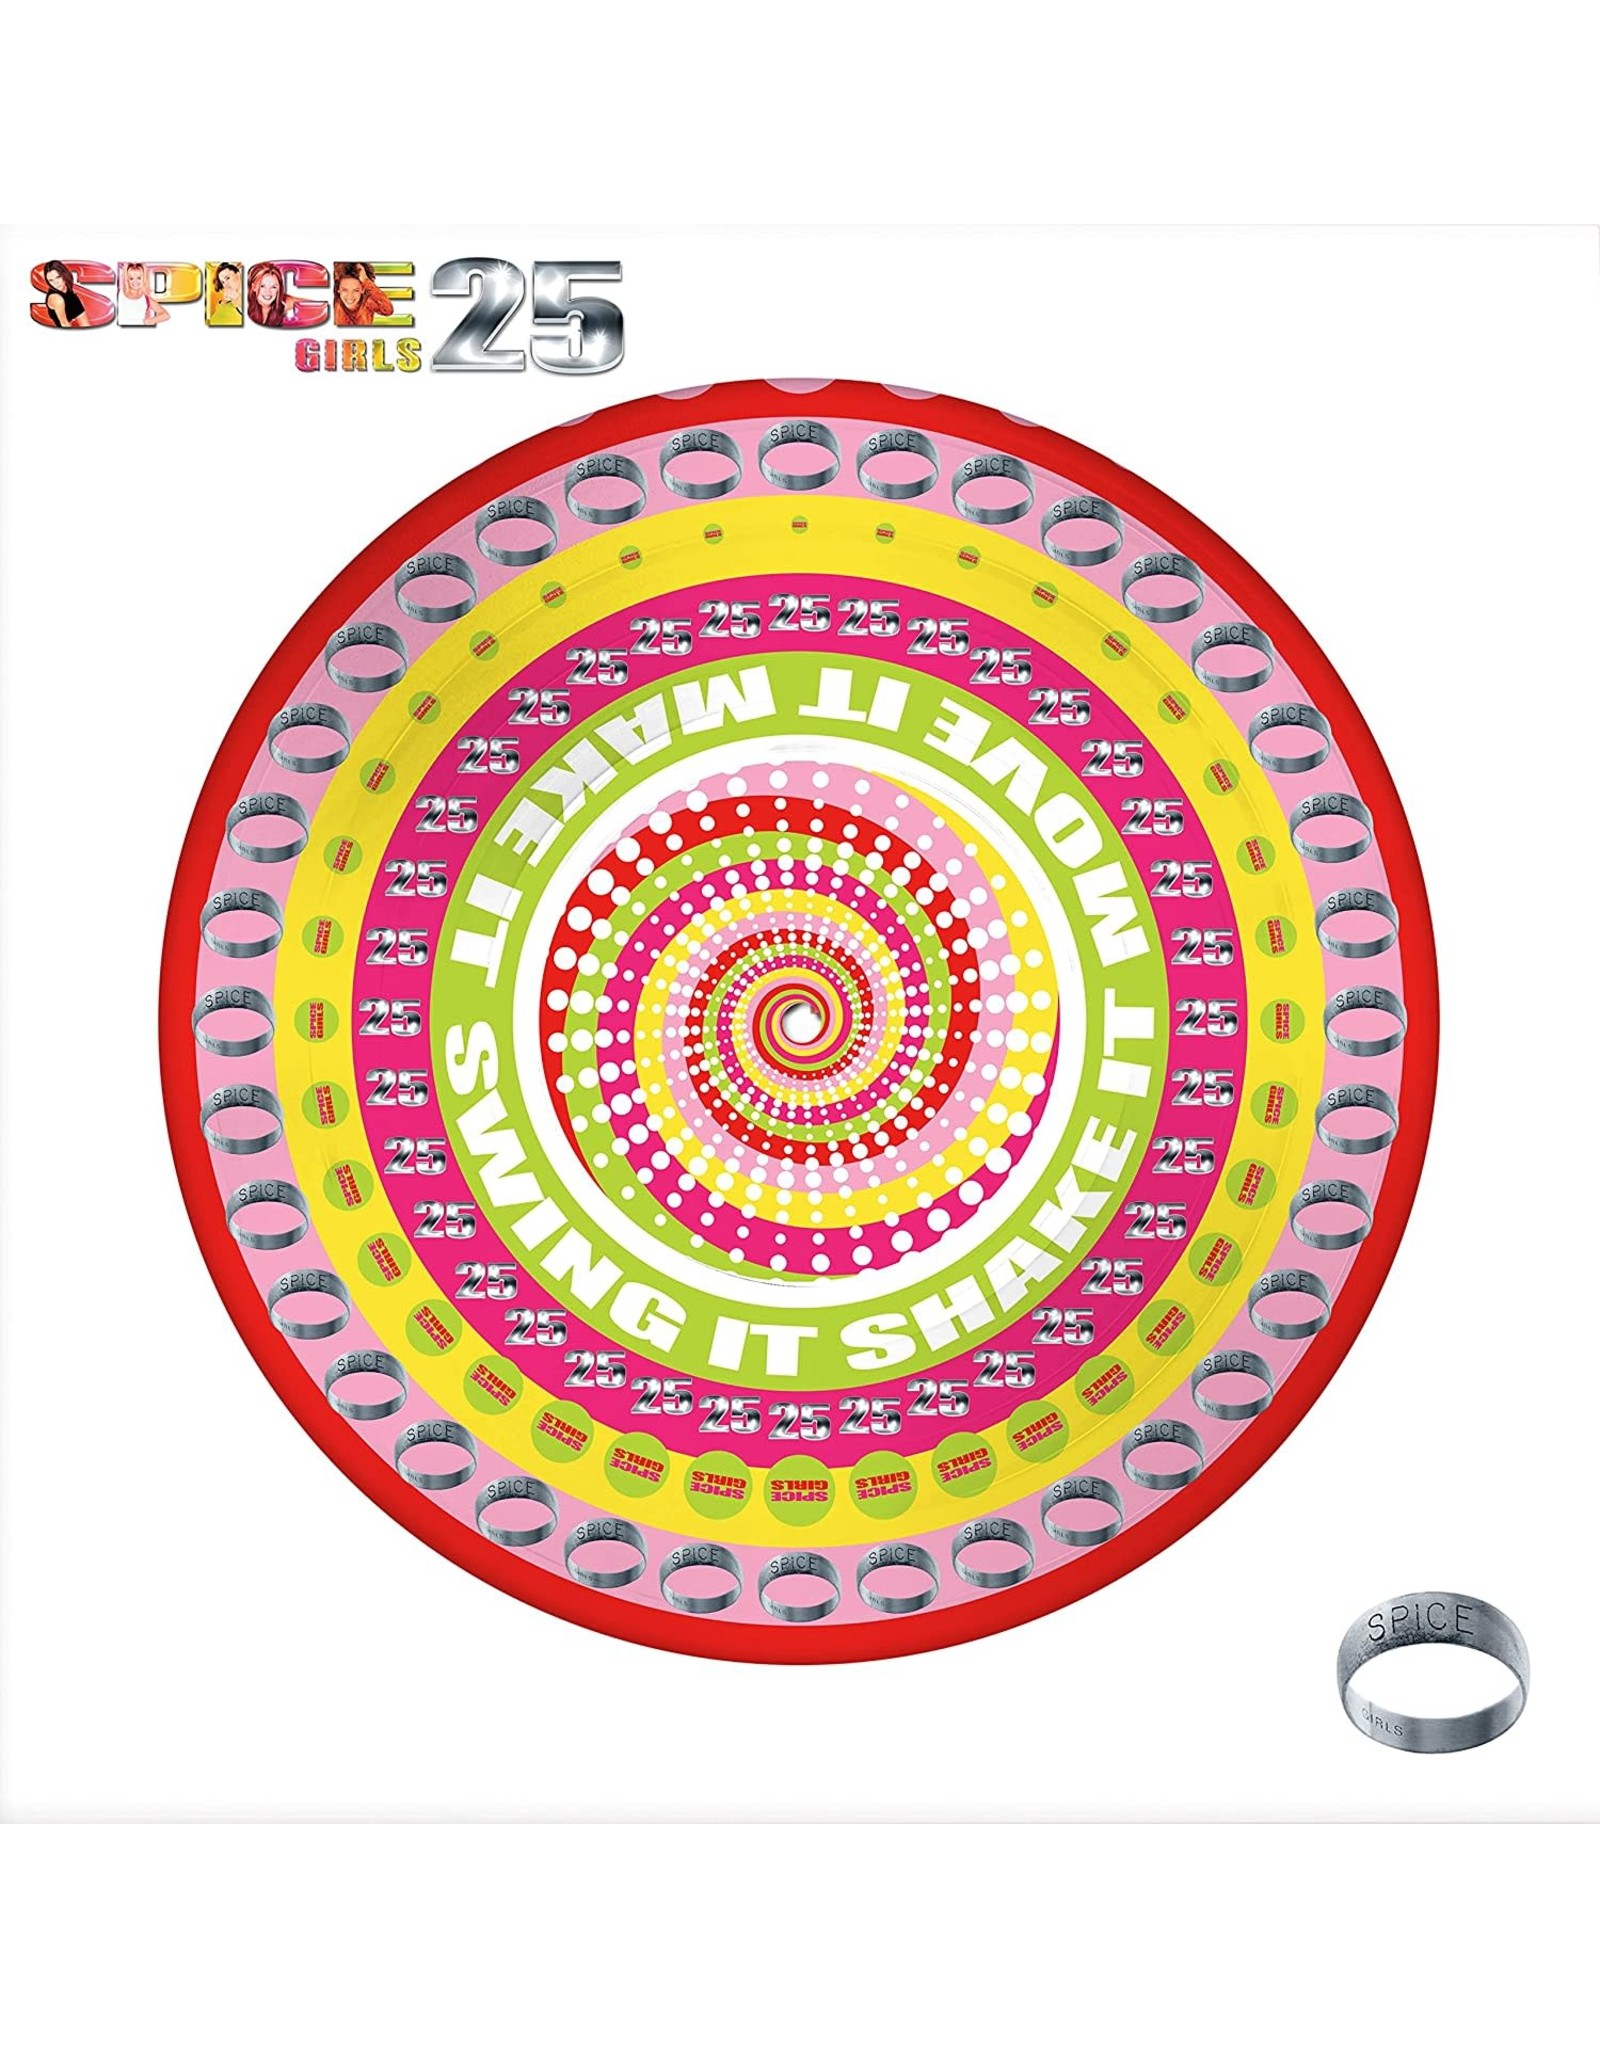 Spice Girls - Spice (25th Anniversary) [Zoetrope Picture Disc]